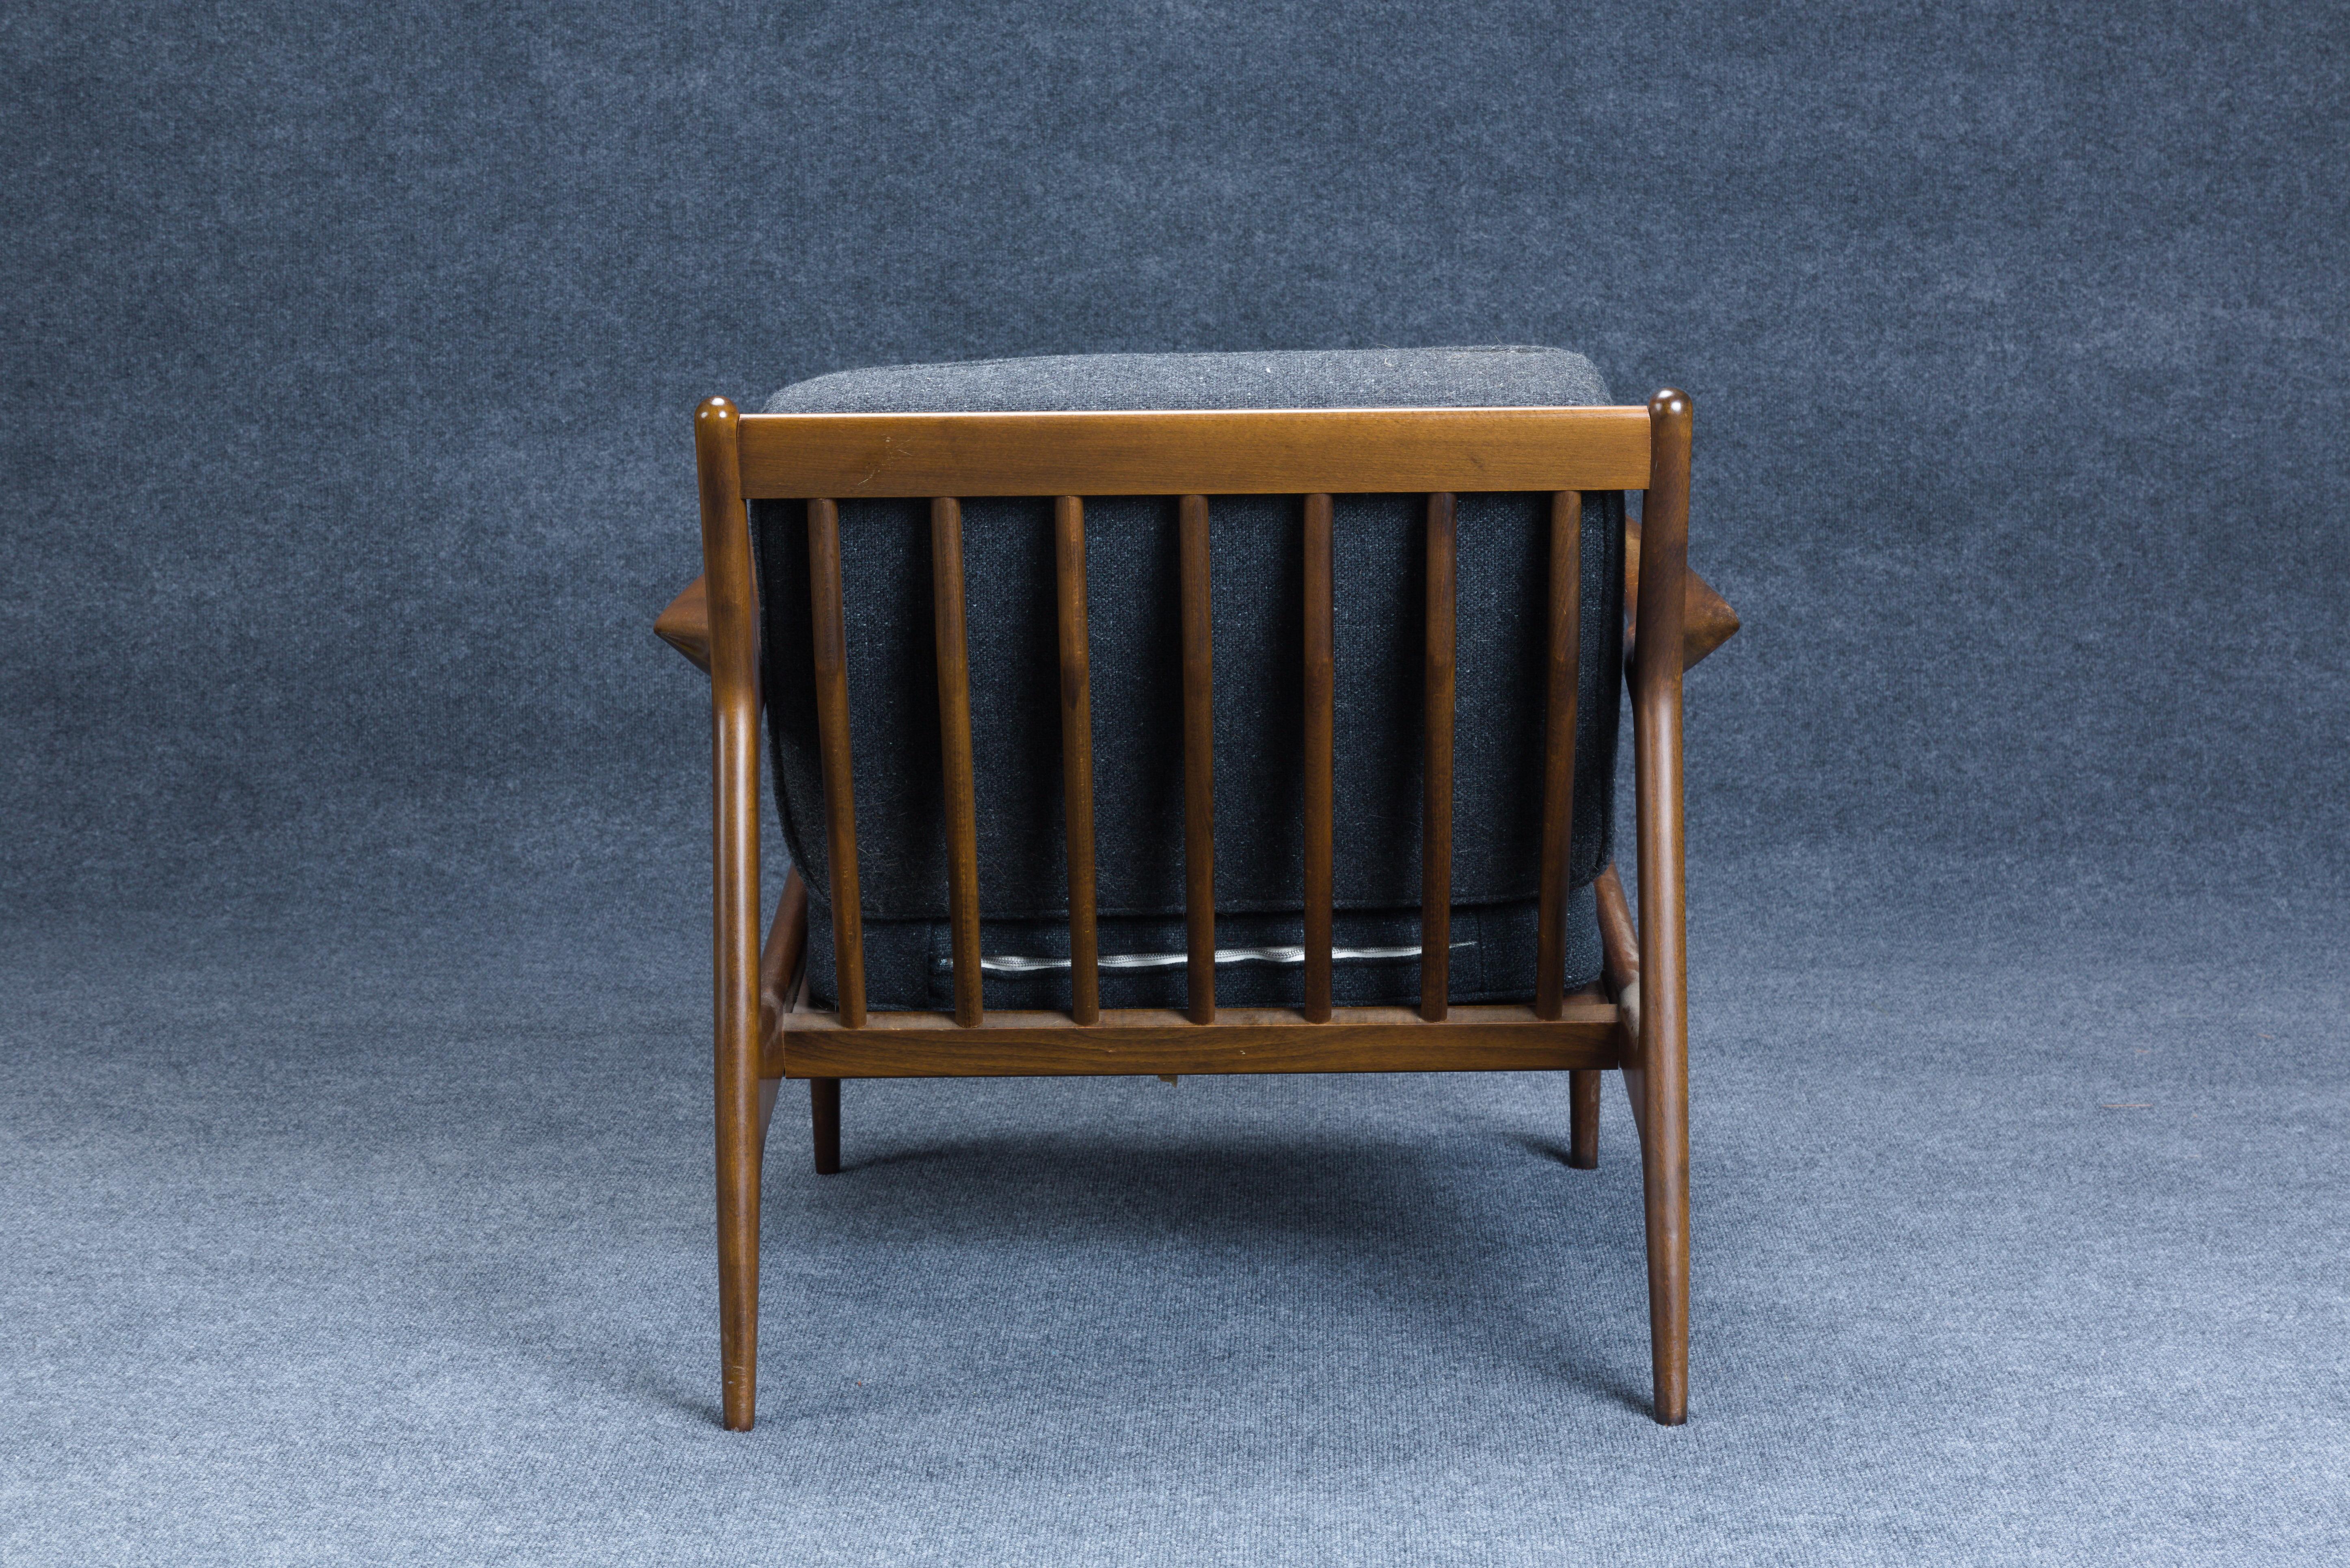 Two Ib Kofod-Larsen (Danish, 1921-2003) for Selig Spear Lounge Chairs, Denmark, c. 1960, walnut, brass, steel, each with round Selig tag, ht. 26 1/2, wd. 30, dp. 30 in.